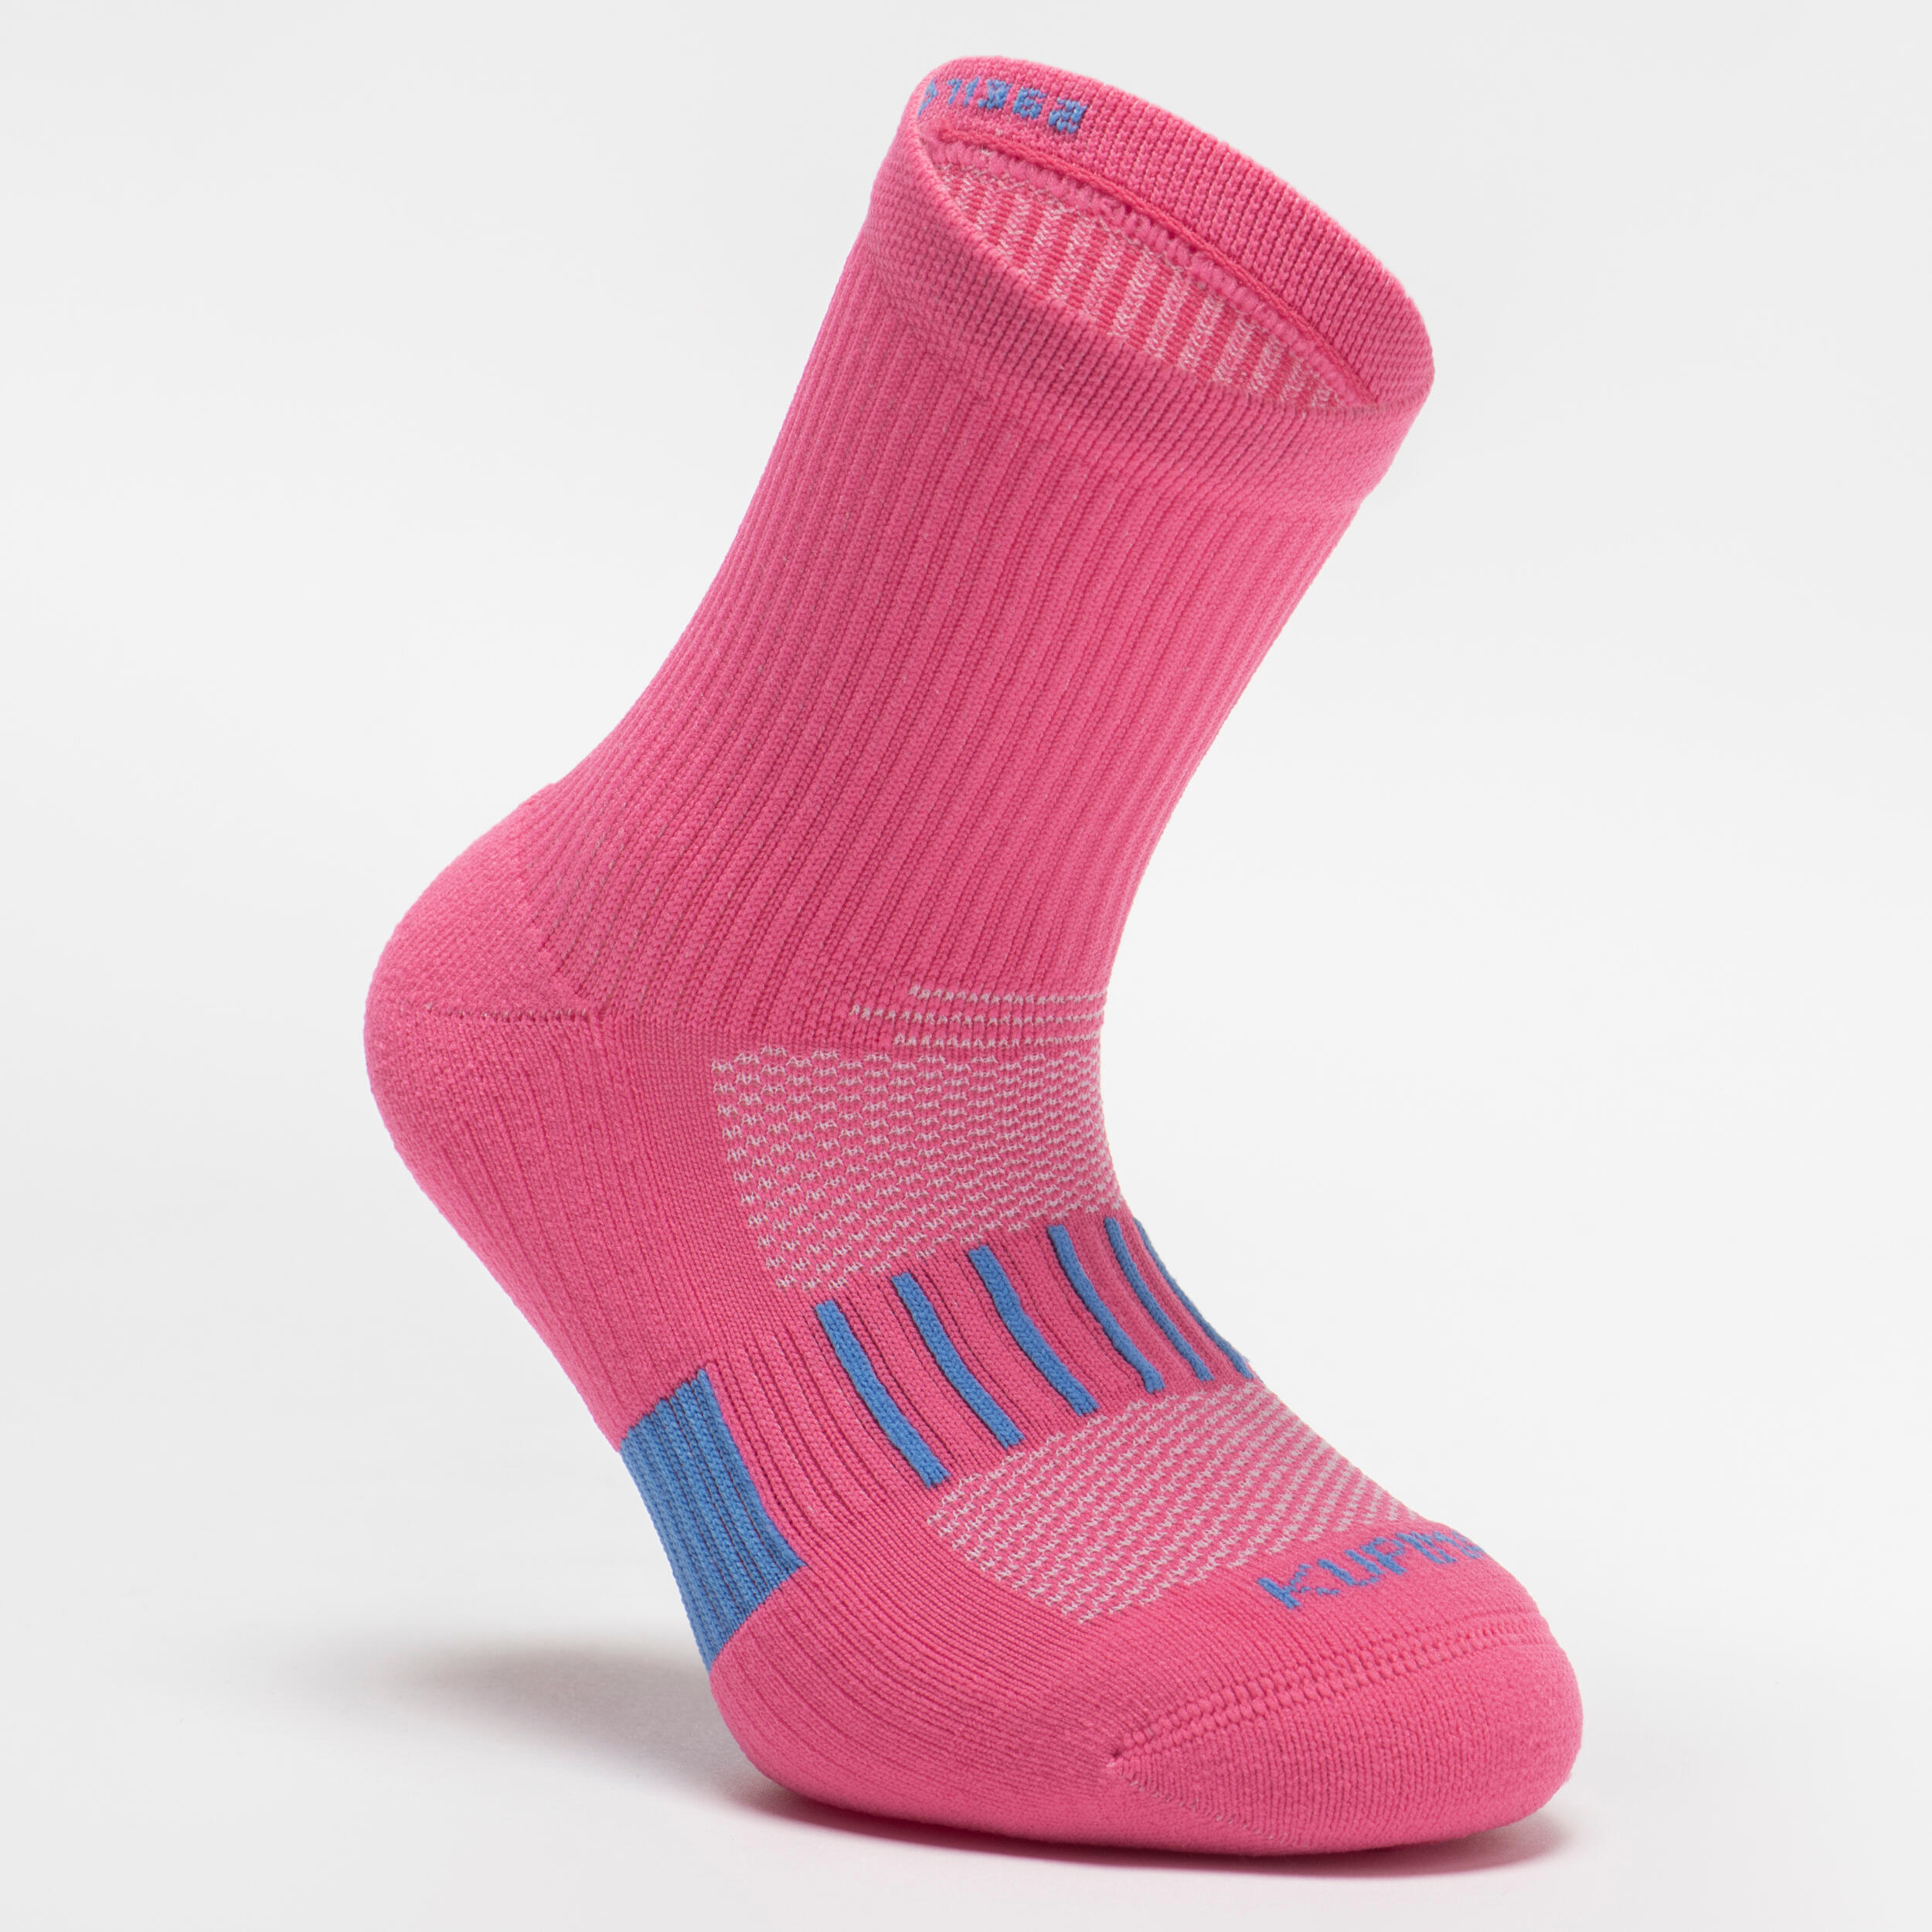 Kids' Socks AT 500 Mid 2-Pack - Plain Pink and White Pink Blue Stripes 9/13